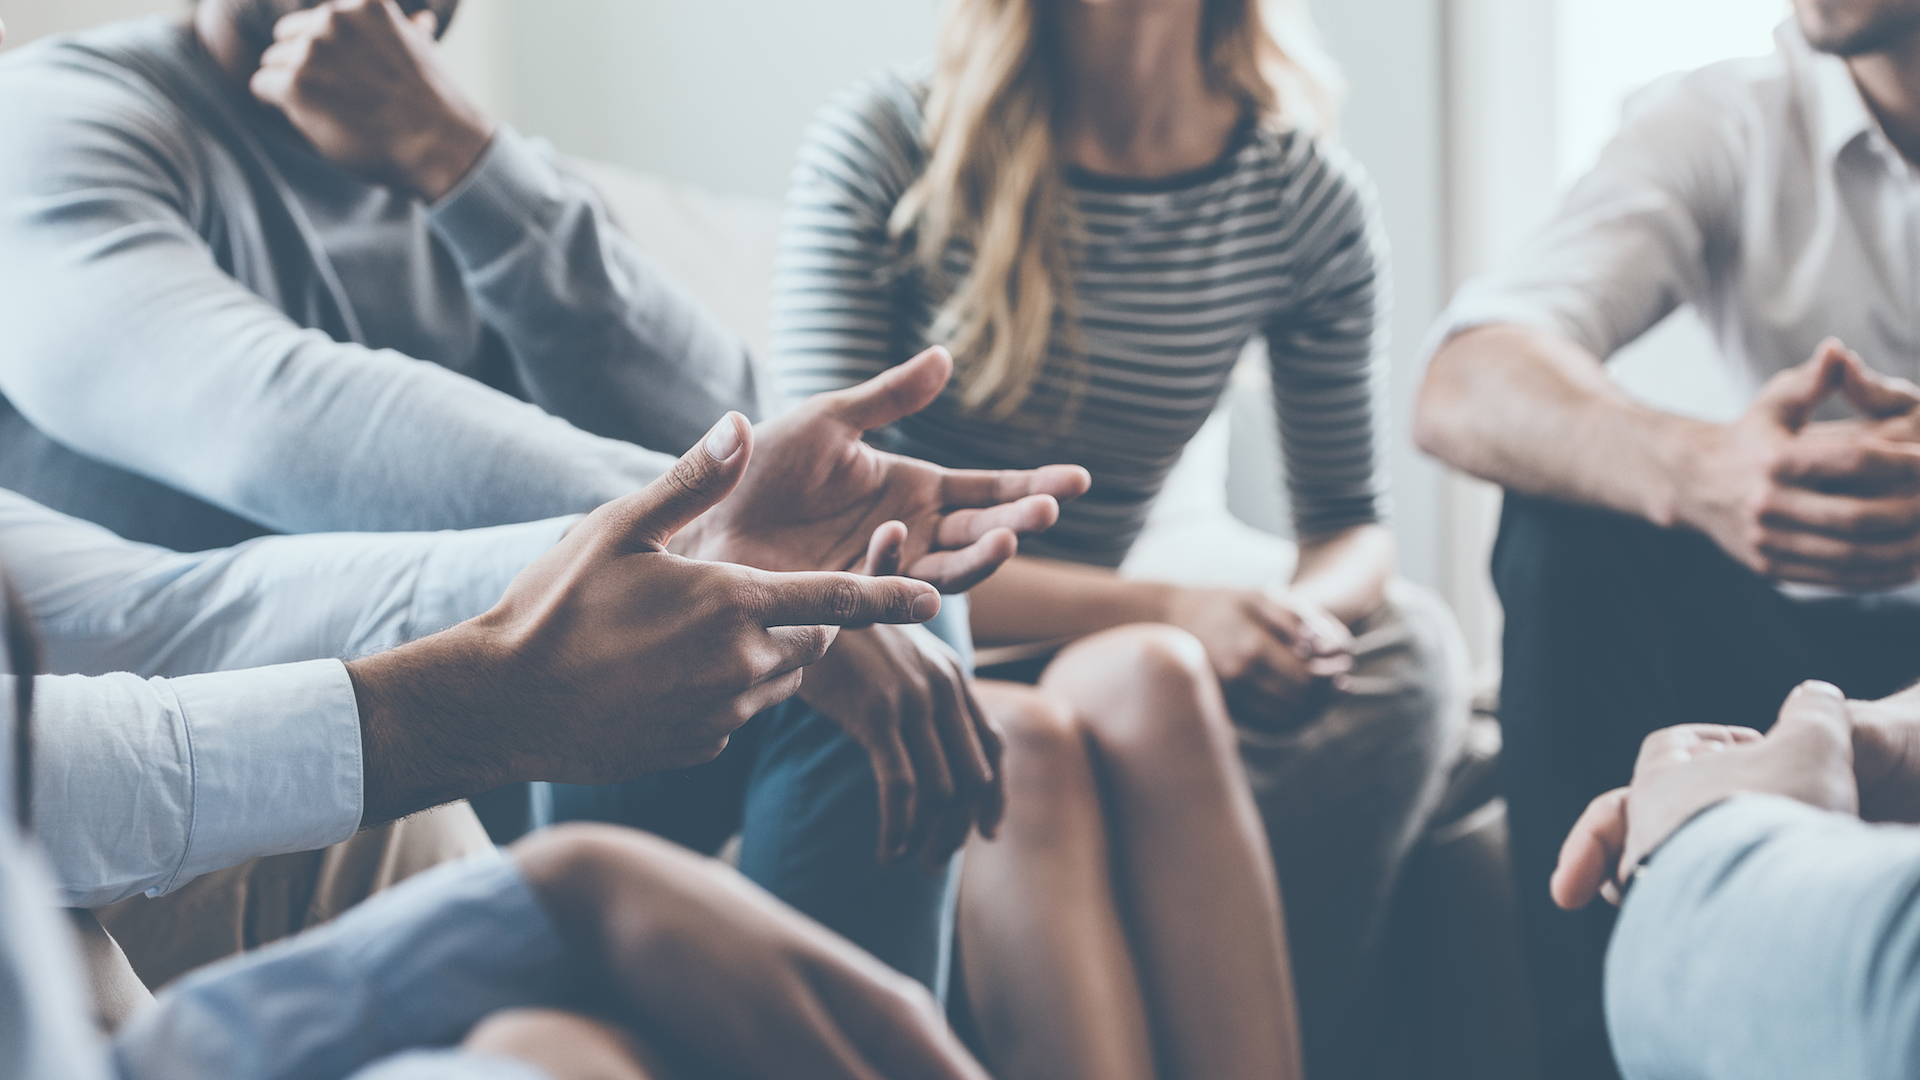 Family Mental Health Support Group
In person meetings start September 19
First and Third Mondays | 7:00–8:30 p.m. | Oak Brook
